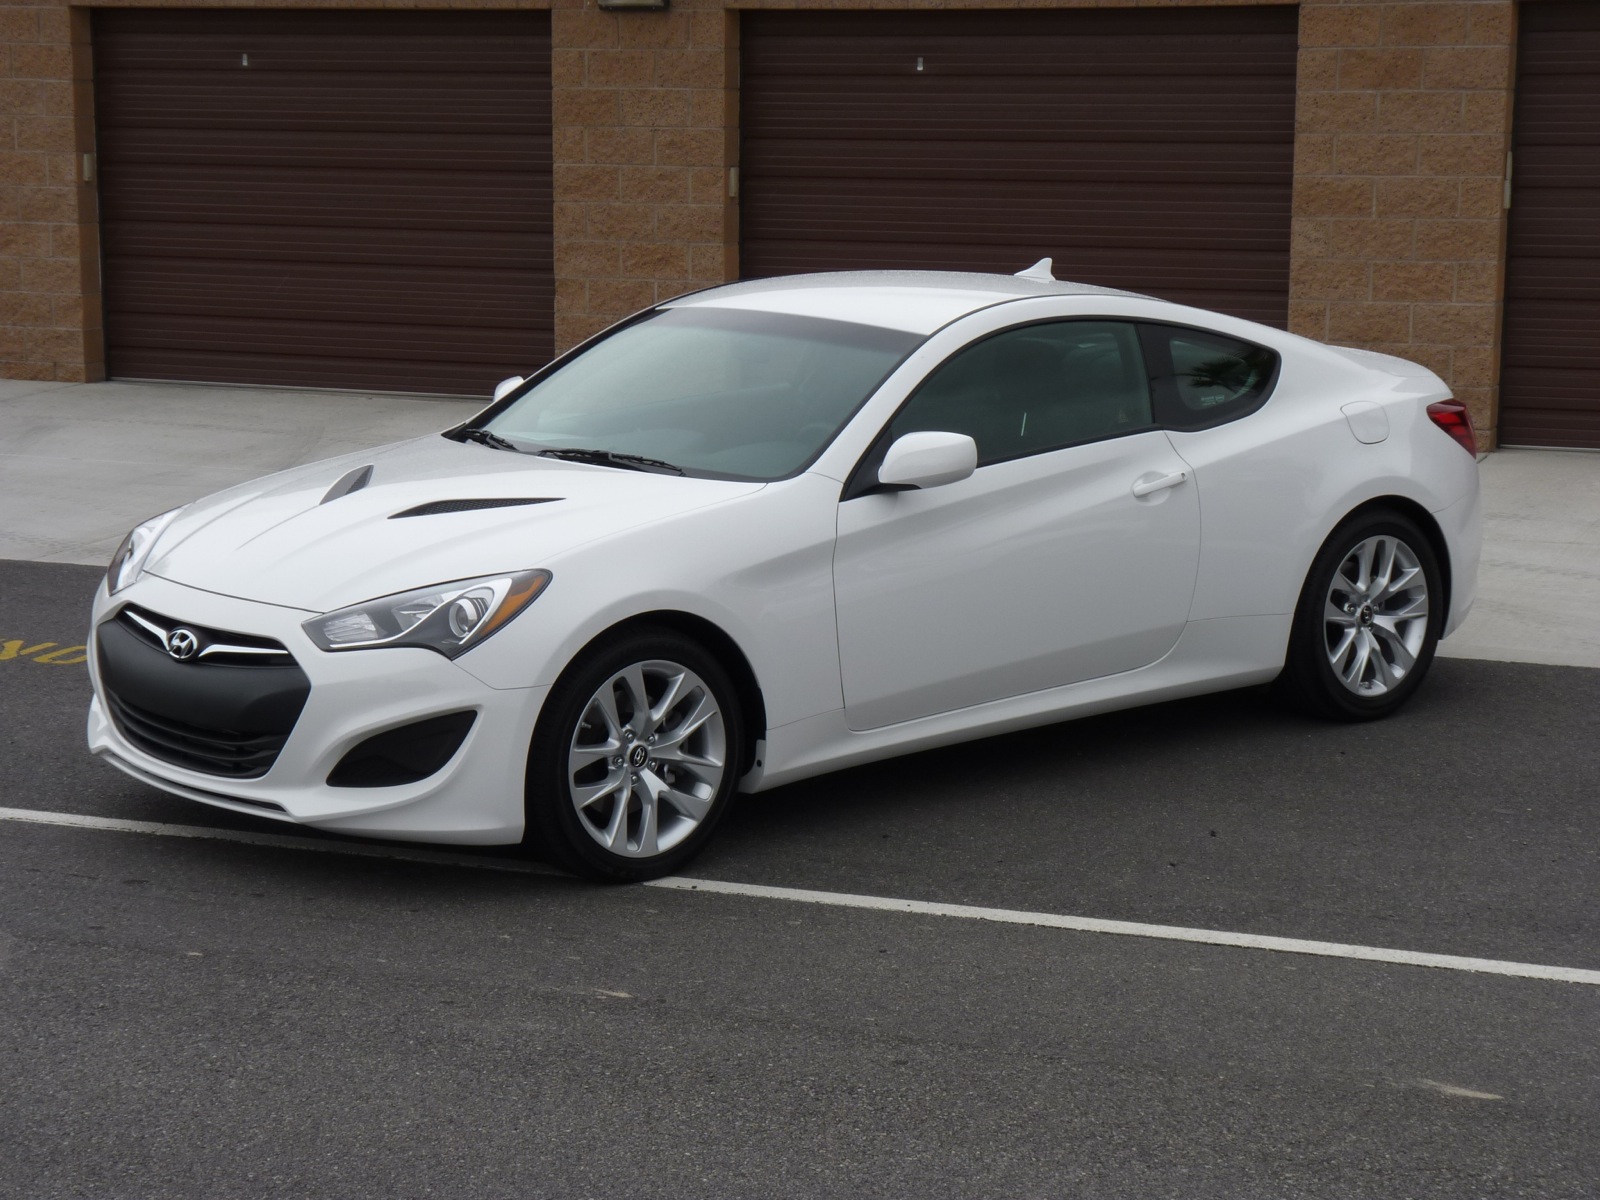 2013 Hyundai Genesis Coupe Review, Ratings, Specs, Prices, and Photos ...